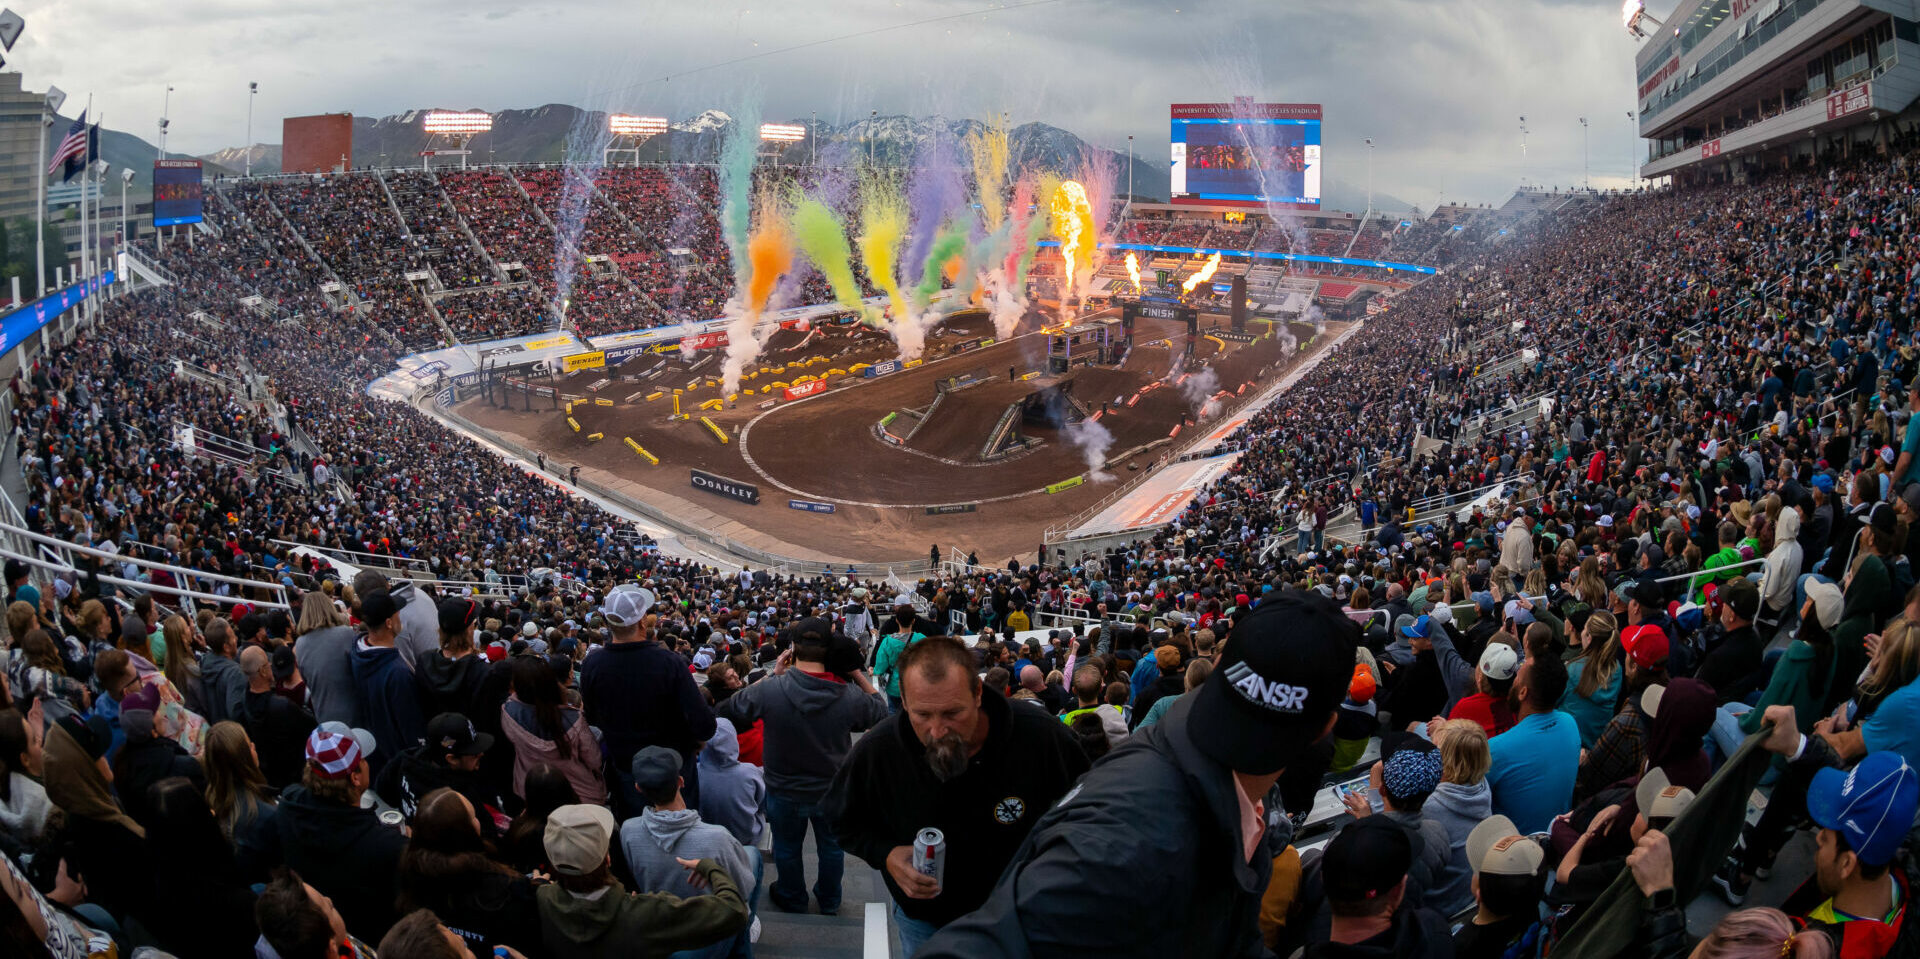 Rice-Eccles Stadium hosted its 22nd Monster Energy Supercross, and its fourth Supercross season finale, in Utah's inspiring “State of Sport